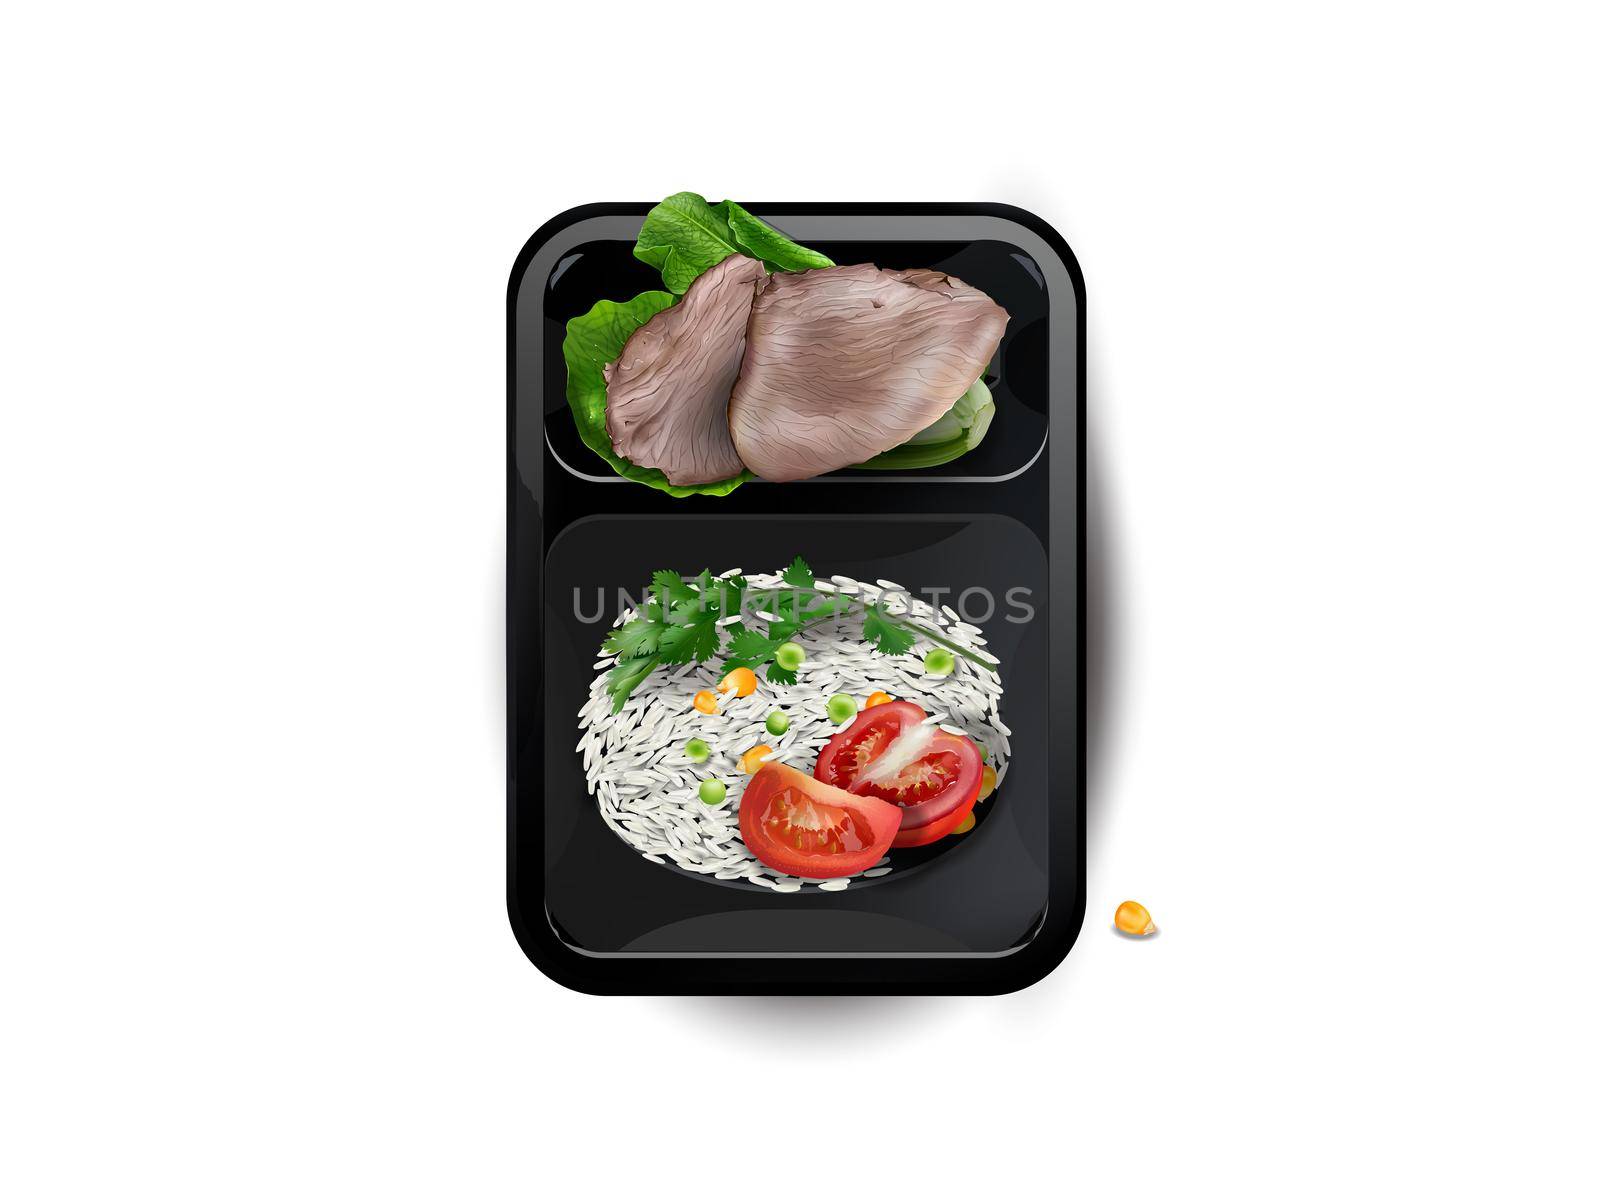 Boiled turkey meat with rice, vegetables and greens in a lunchbox on a white background, top view. Realistic style illustration.